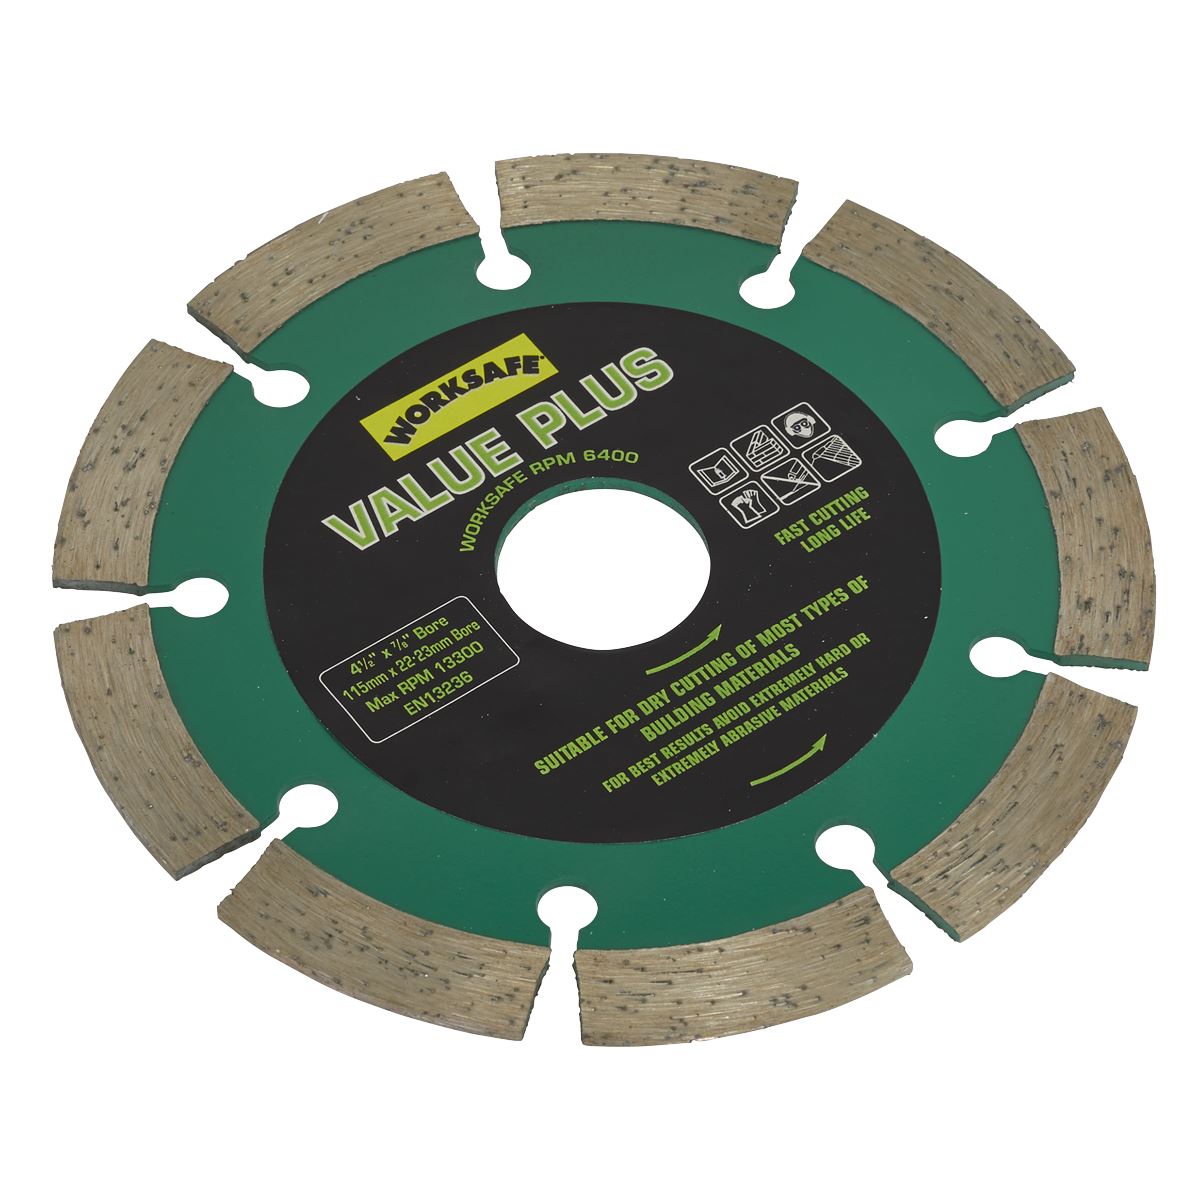 Worksafe by Sealey Value Plus Diamond Cutting Blade 115mm x 22mm